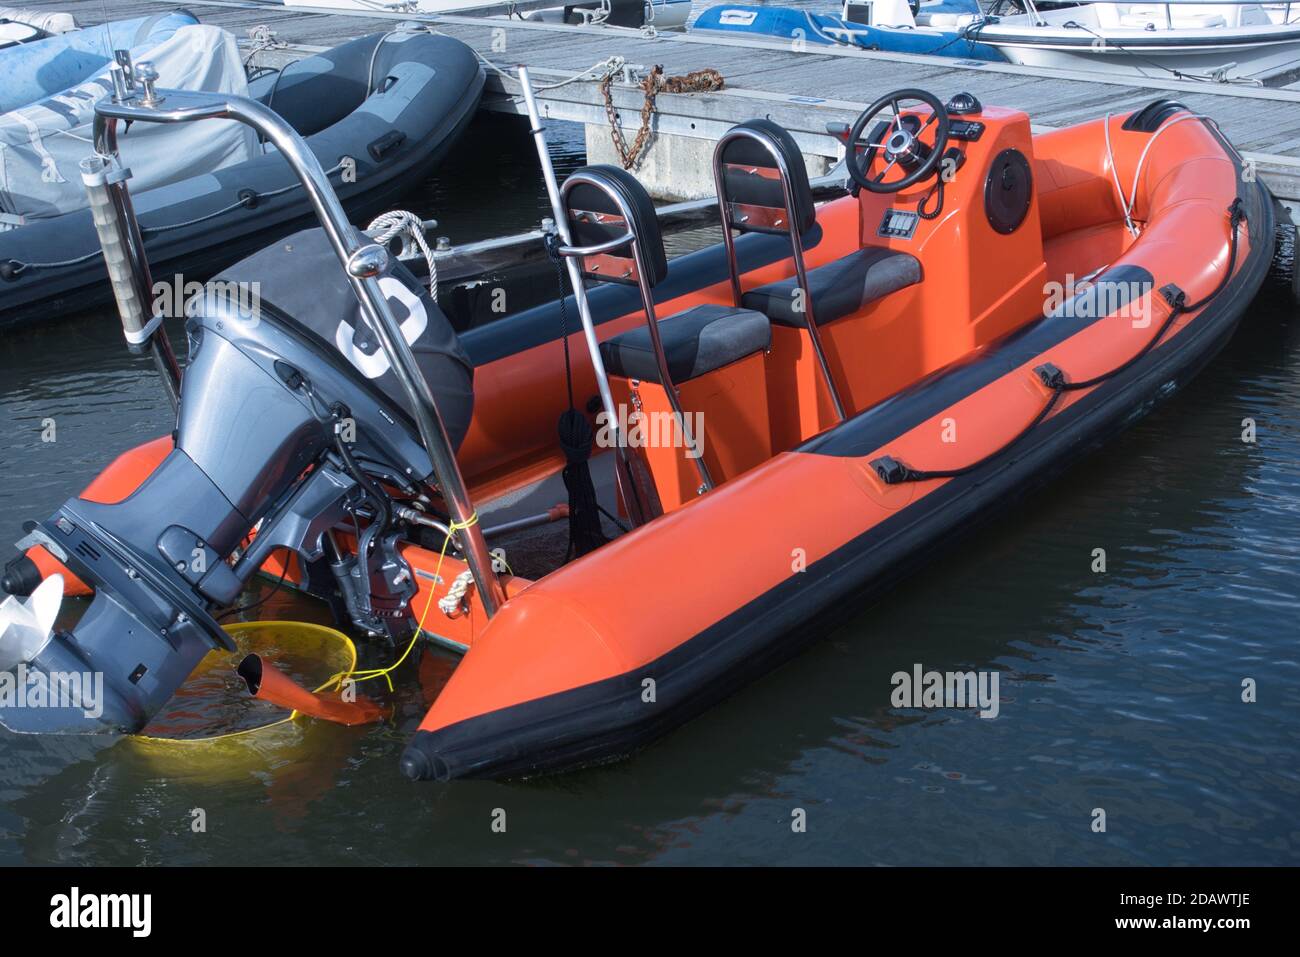 An orange RIB - Rigid Inflatable Boat tied up to a pontoon in a marina  Stock Photo - Alamy